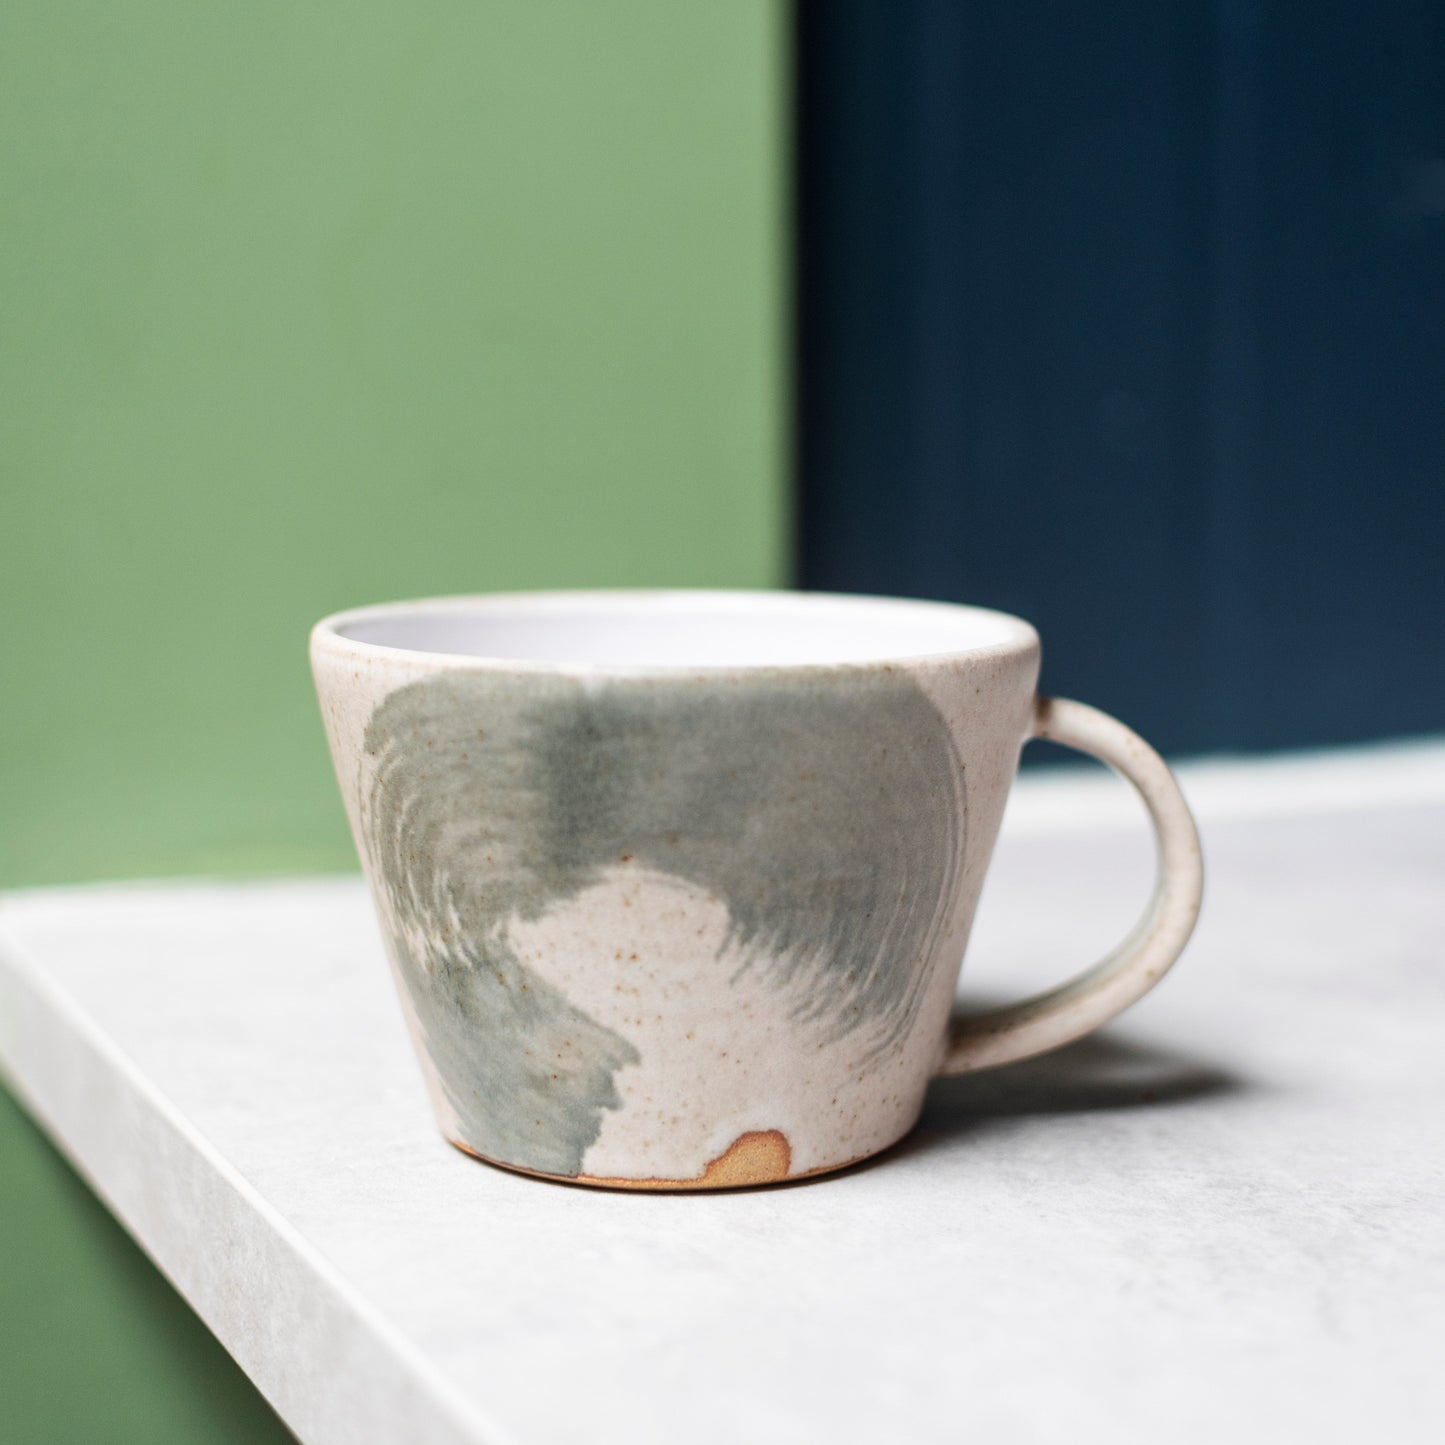 'Wave' buff clay mug - available early March - The Bristol Artisan Handmade Sustainable Gifts and Homewares.